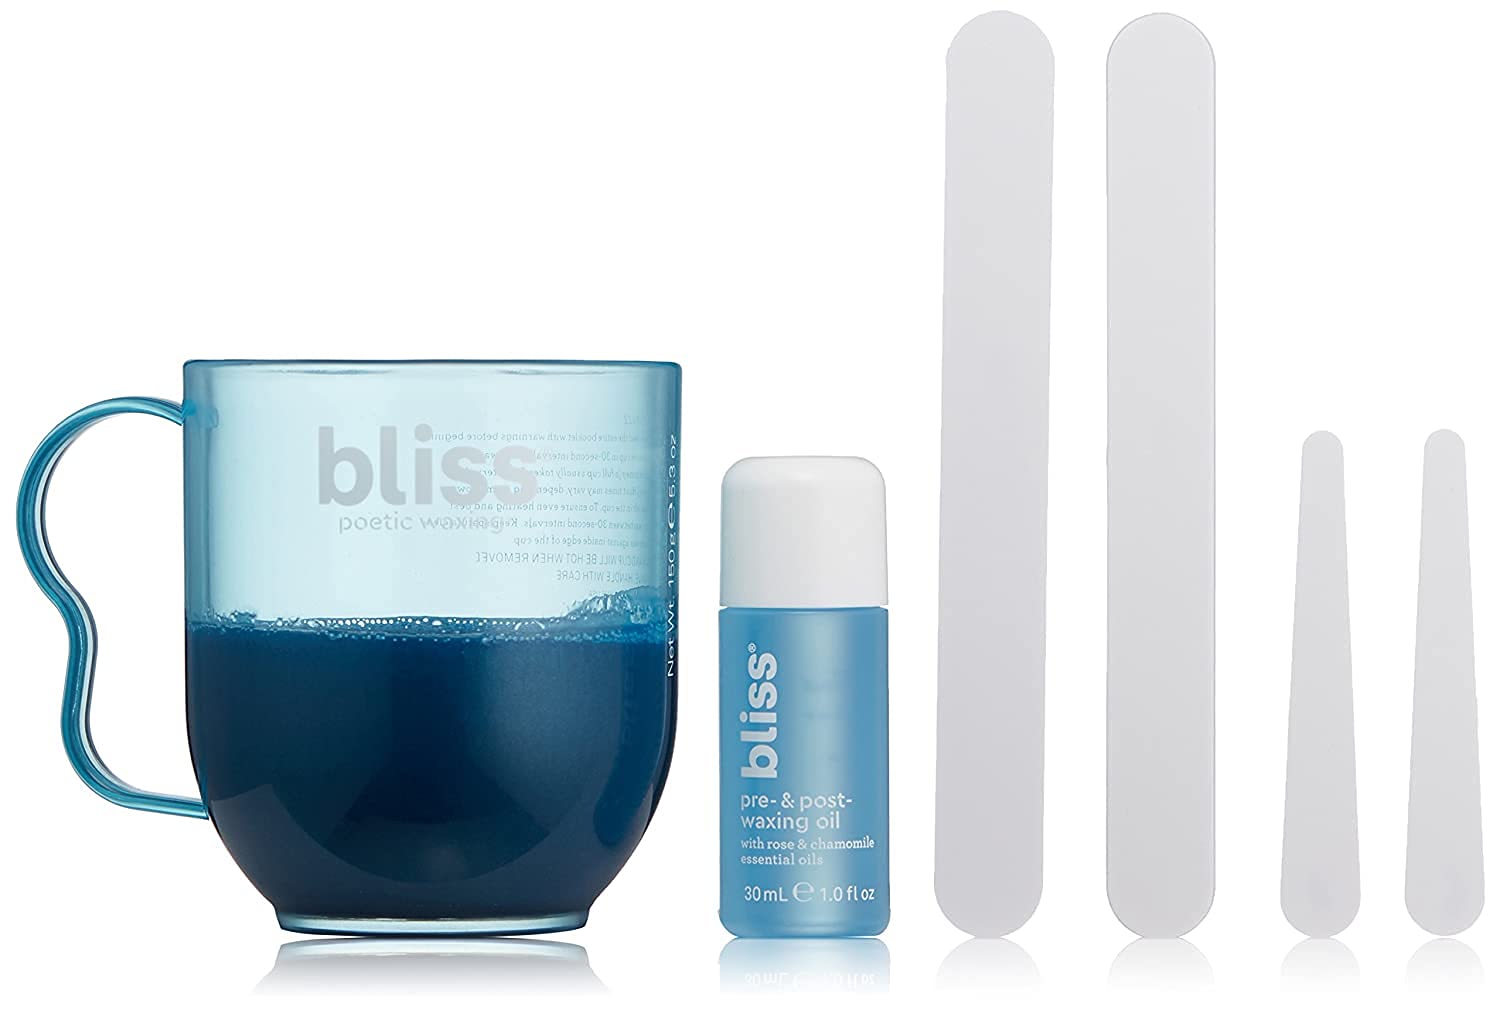 Bliss Poetic Waxing At Home Wax Kit - 5.3 Fl Oz - Microwavable Stripless Wax Hair Removal Kit - Fragrance Free - Safe for All Skin Types - 6 PC Set